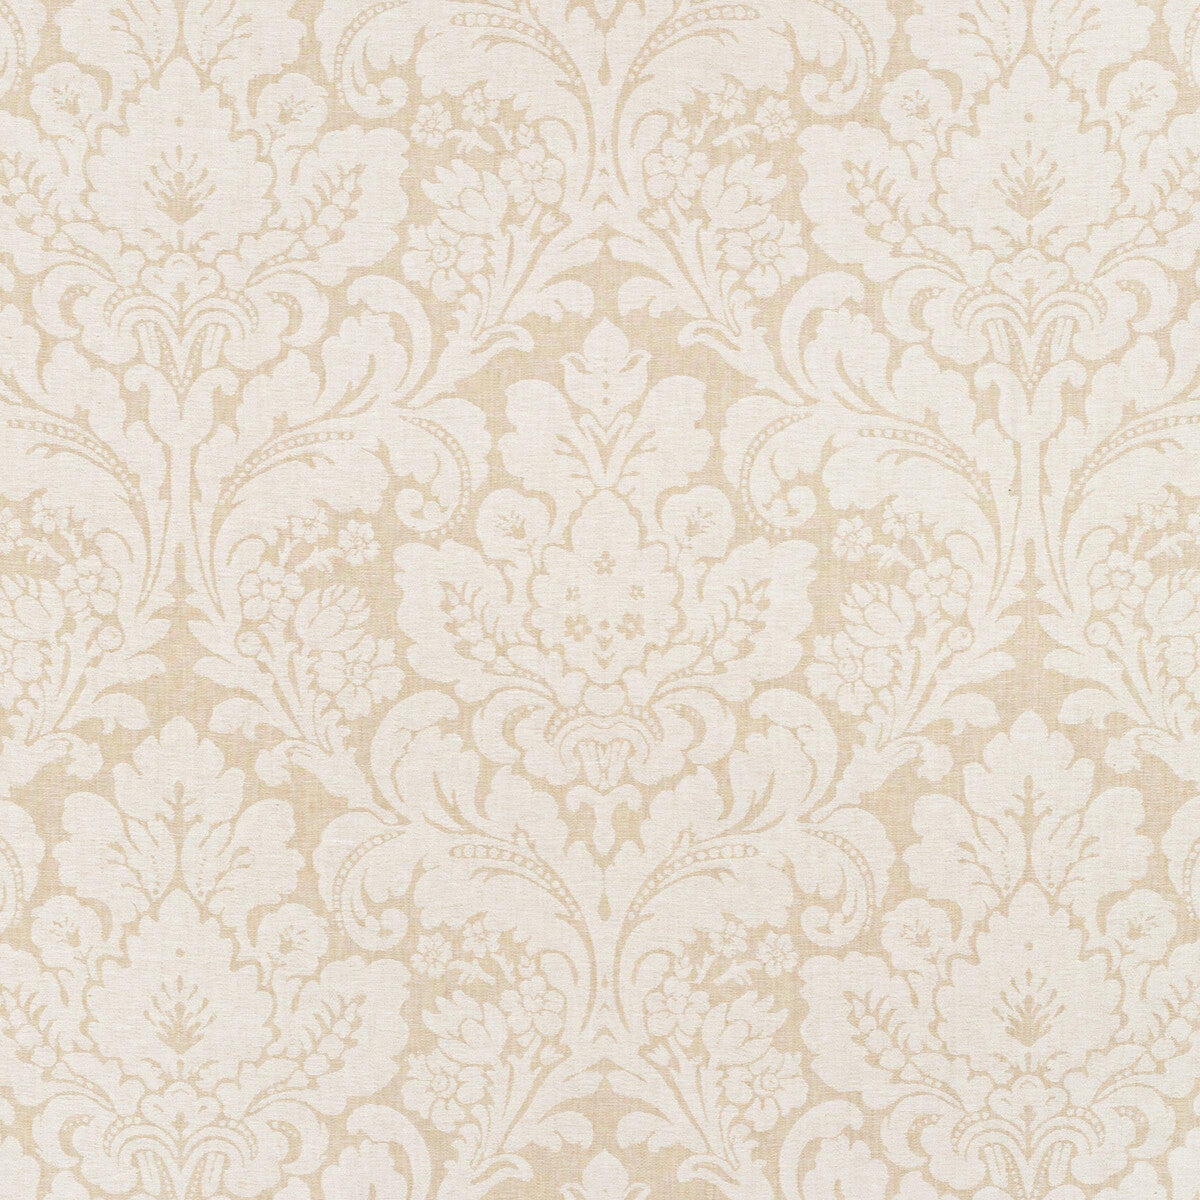 Acanthus Damask fabric in pearl color - pattern 2020212.1.0 - by Lee Jofa in the Oscar De La Renta IV collection